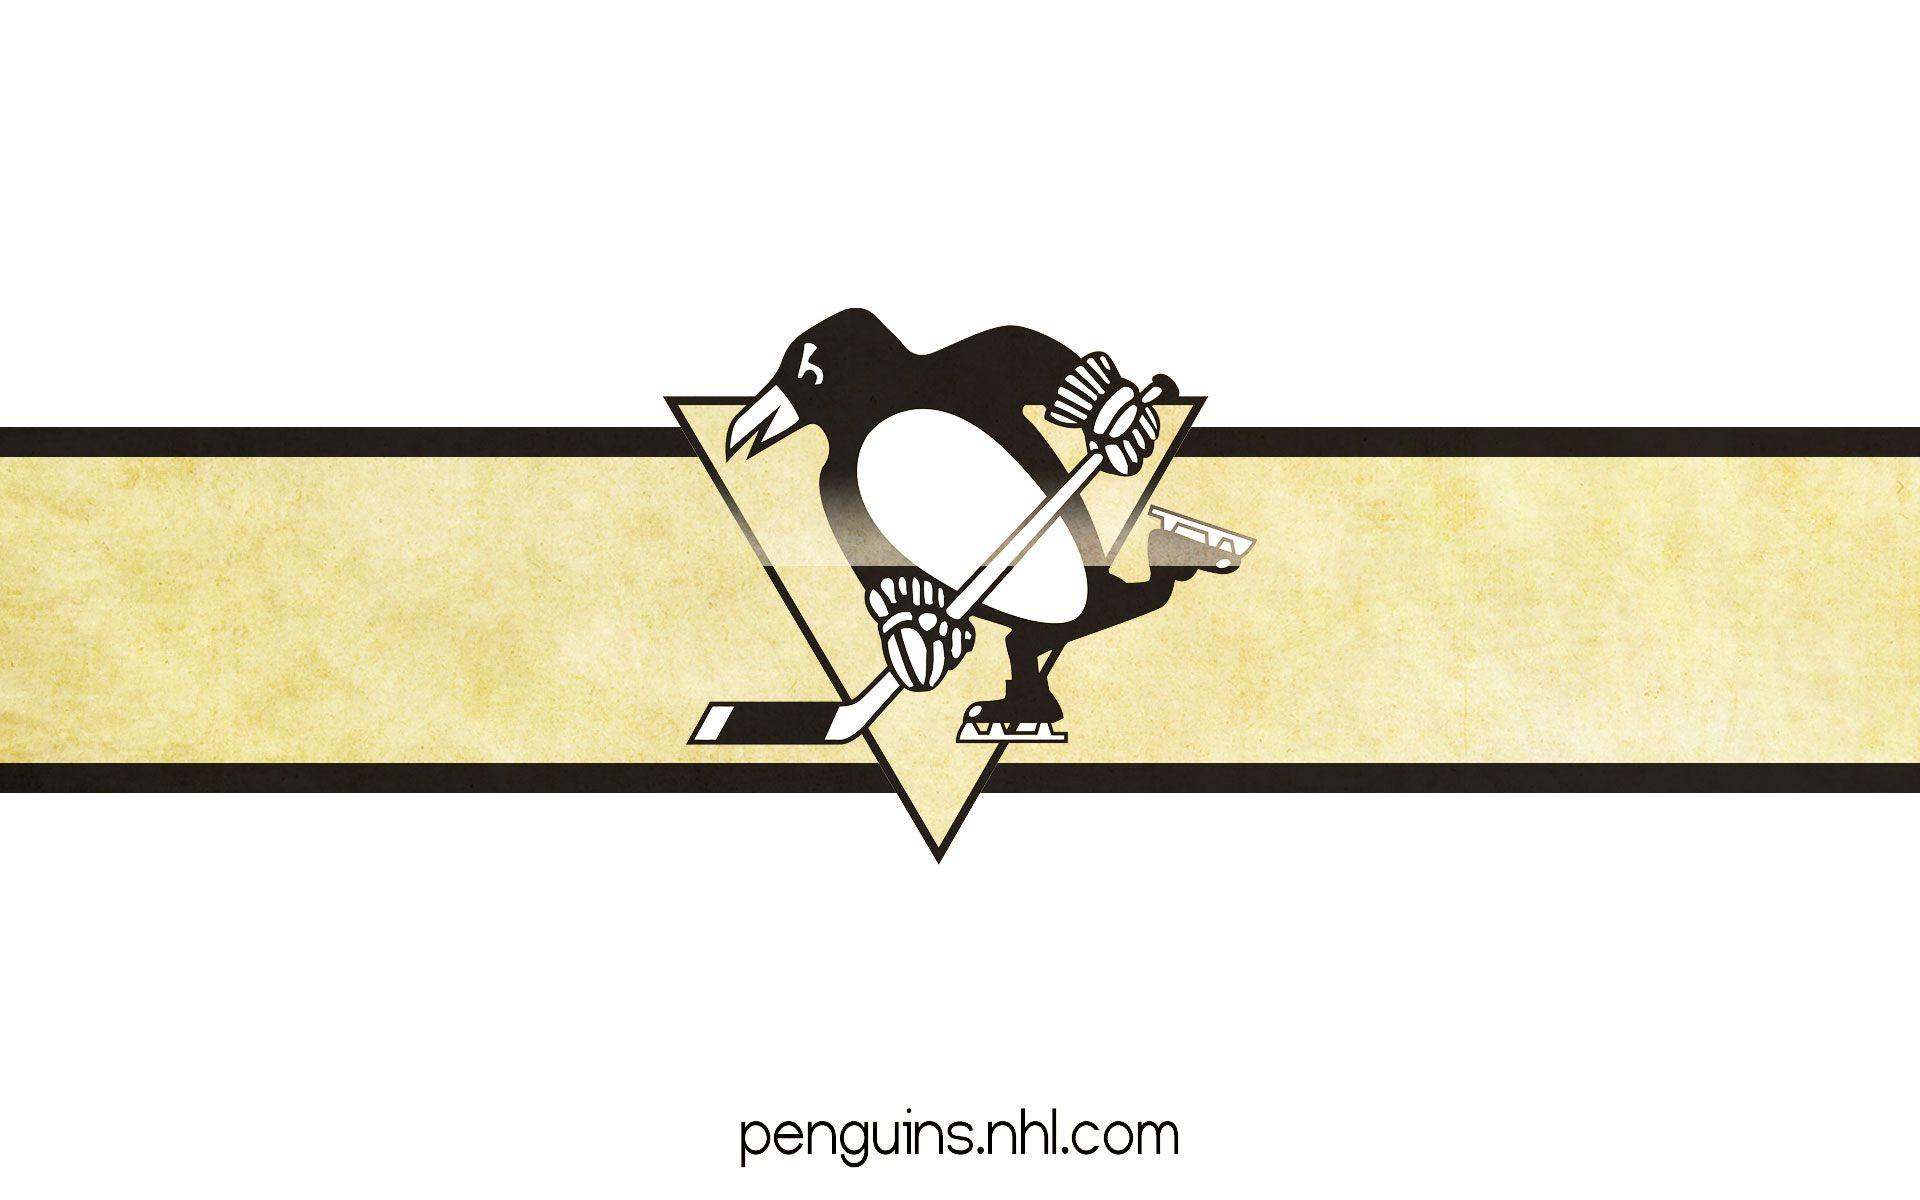 pittsburgh penguins wallpapers